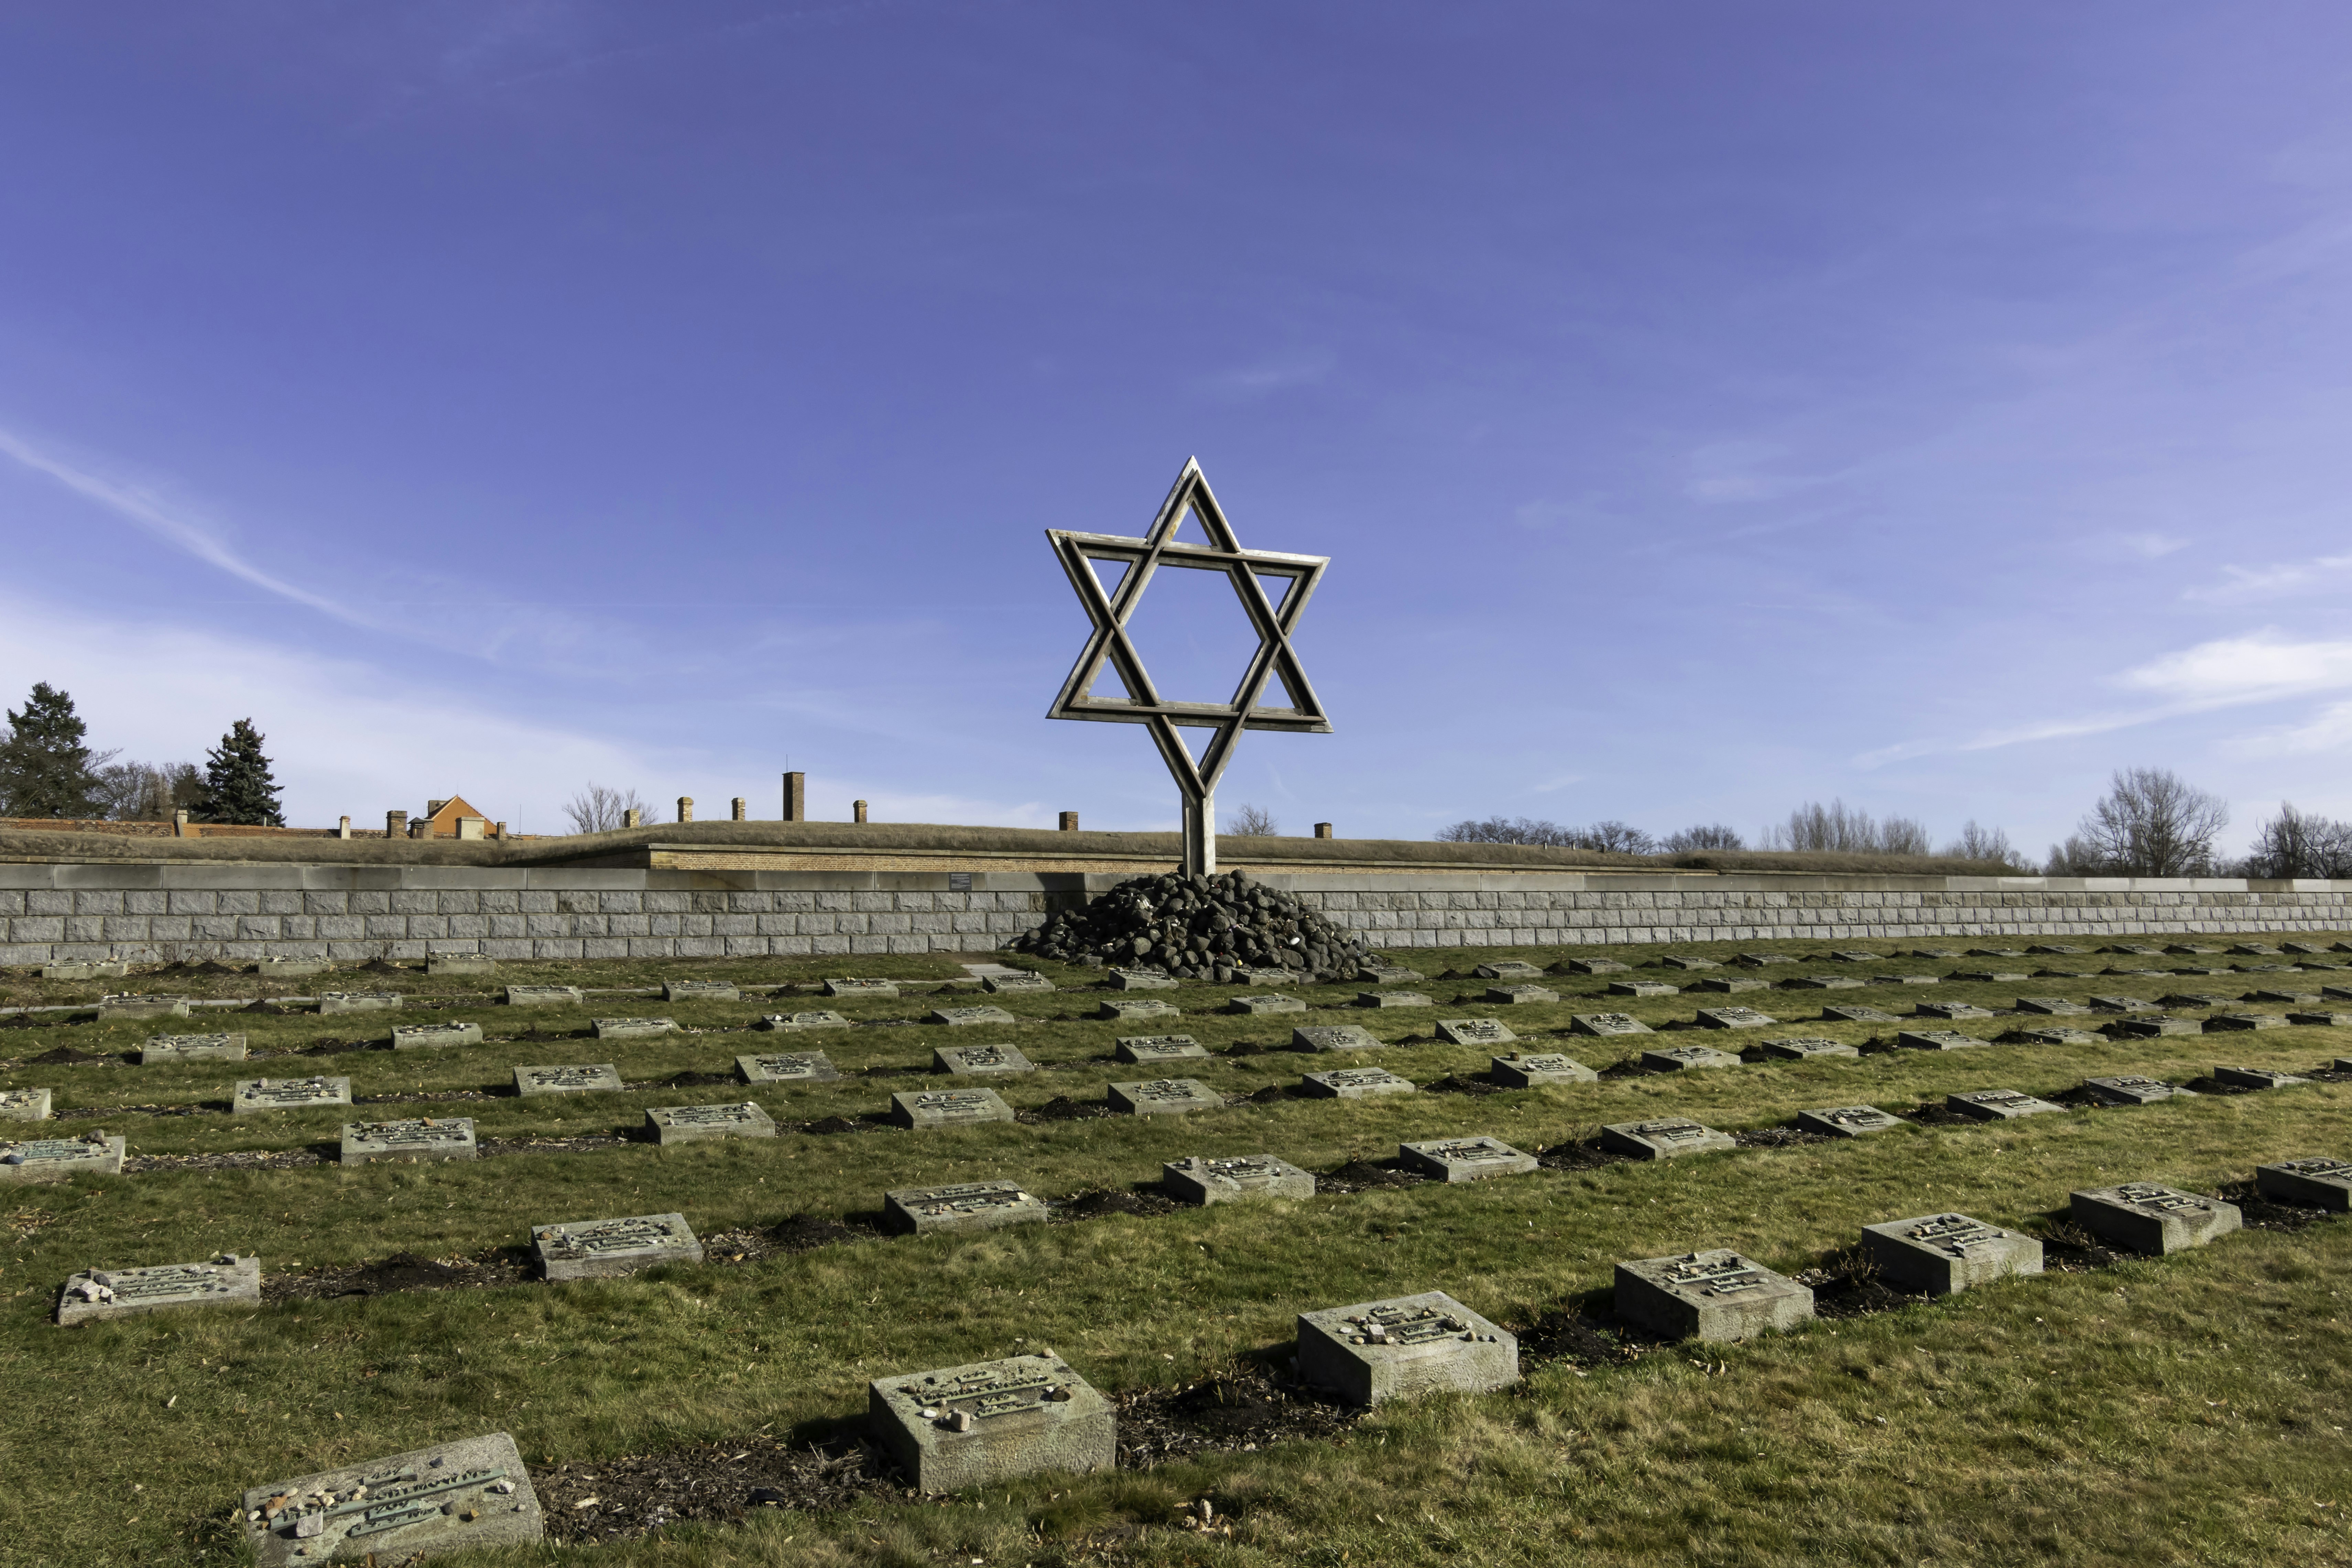 A large Star of David has been erected in the middle of the National Cemetery Theresienstadt that contains about 10,000 victims.